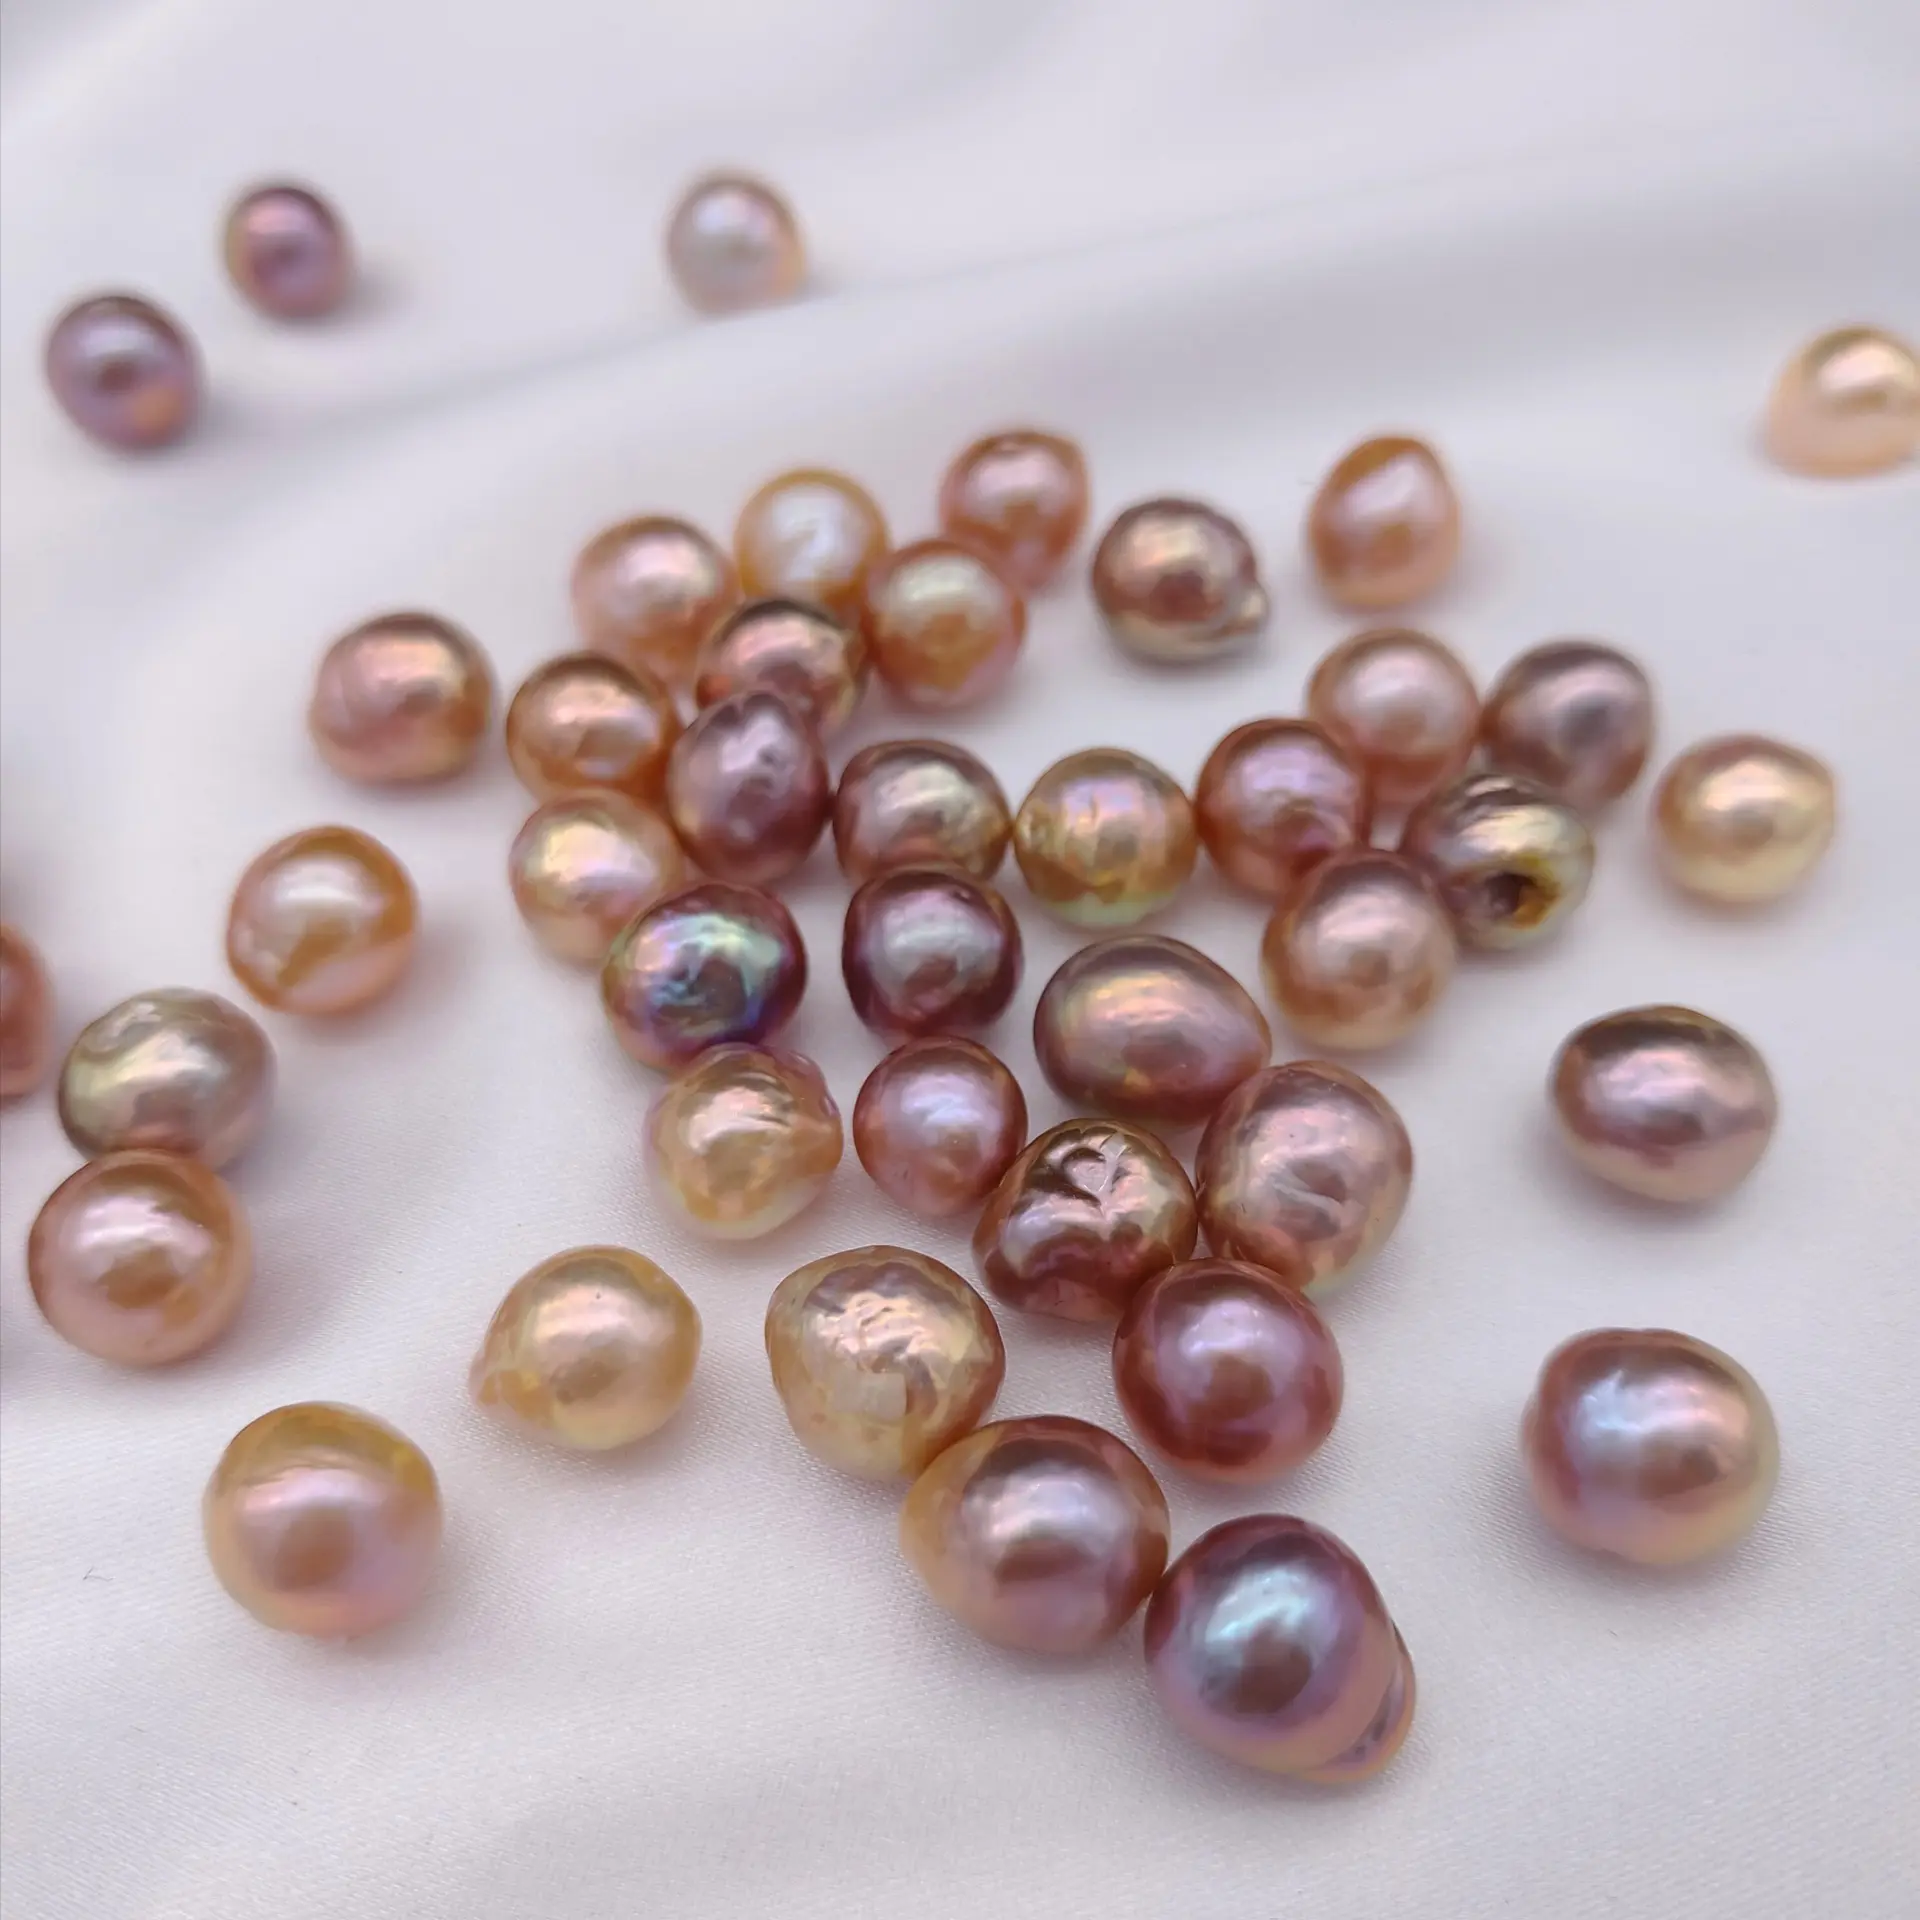 Color strong light half hole full hole Baroque pearl loose pearl handmade strand of pearls for earring necklace